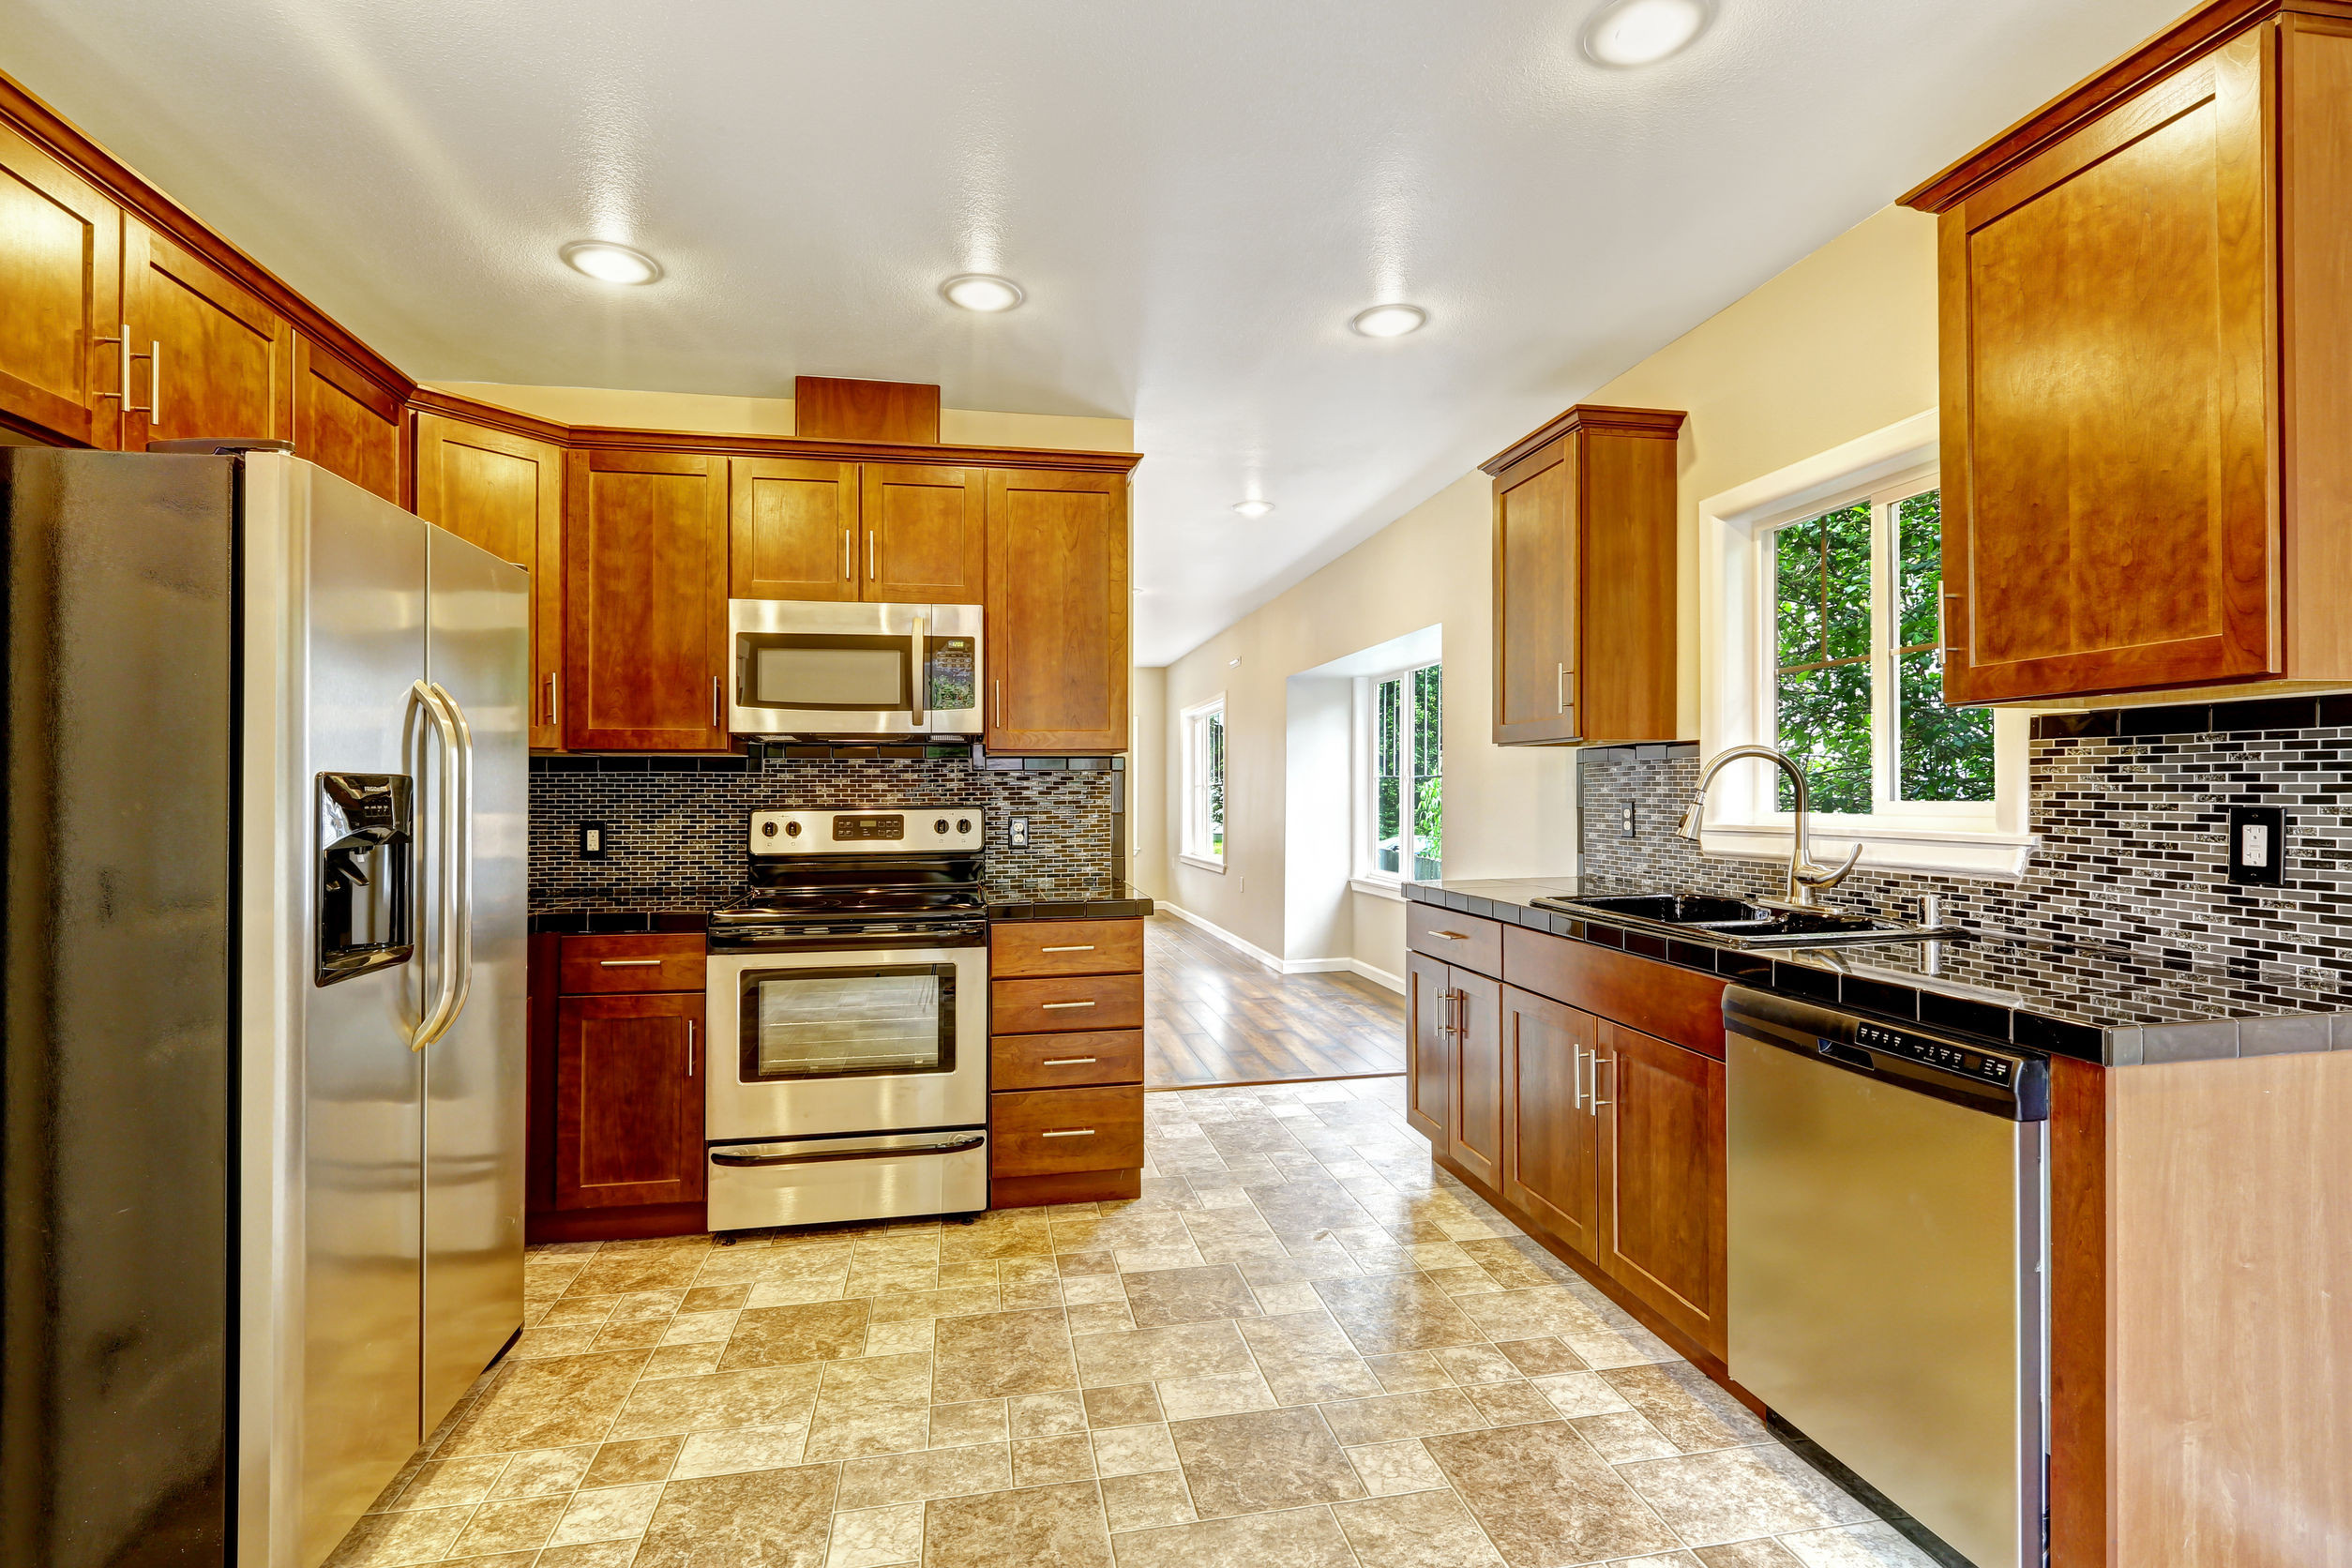 Kitchen Remodeling Pittsburgh
 Benefits of Kitchen Remodeling in Pittsburgh Home